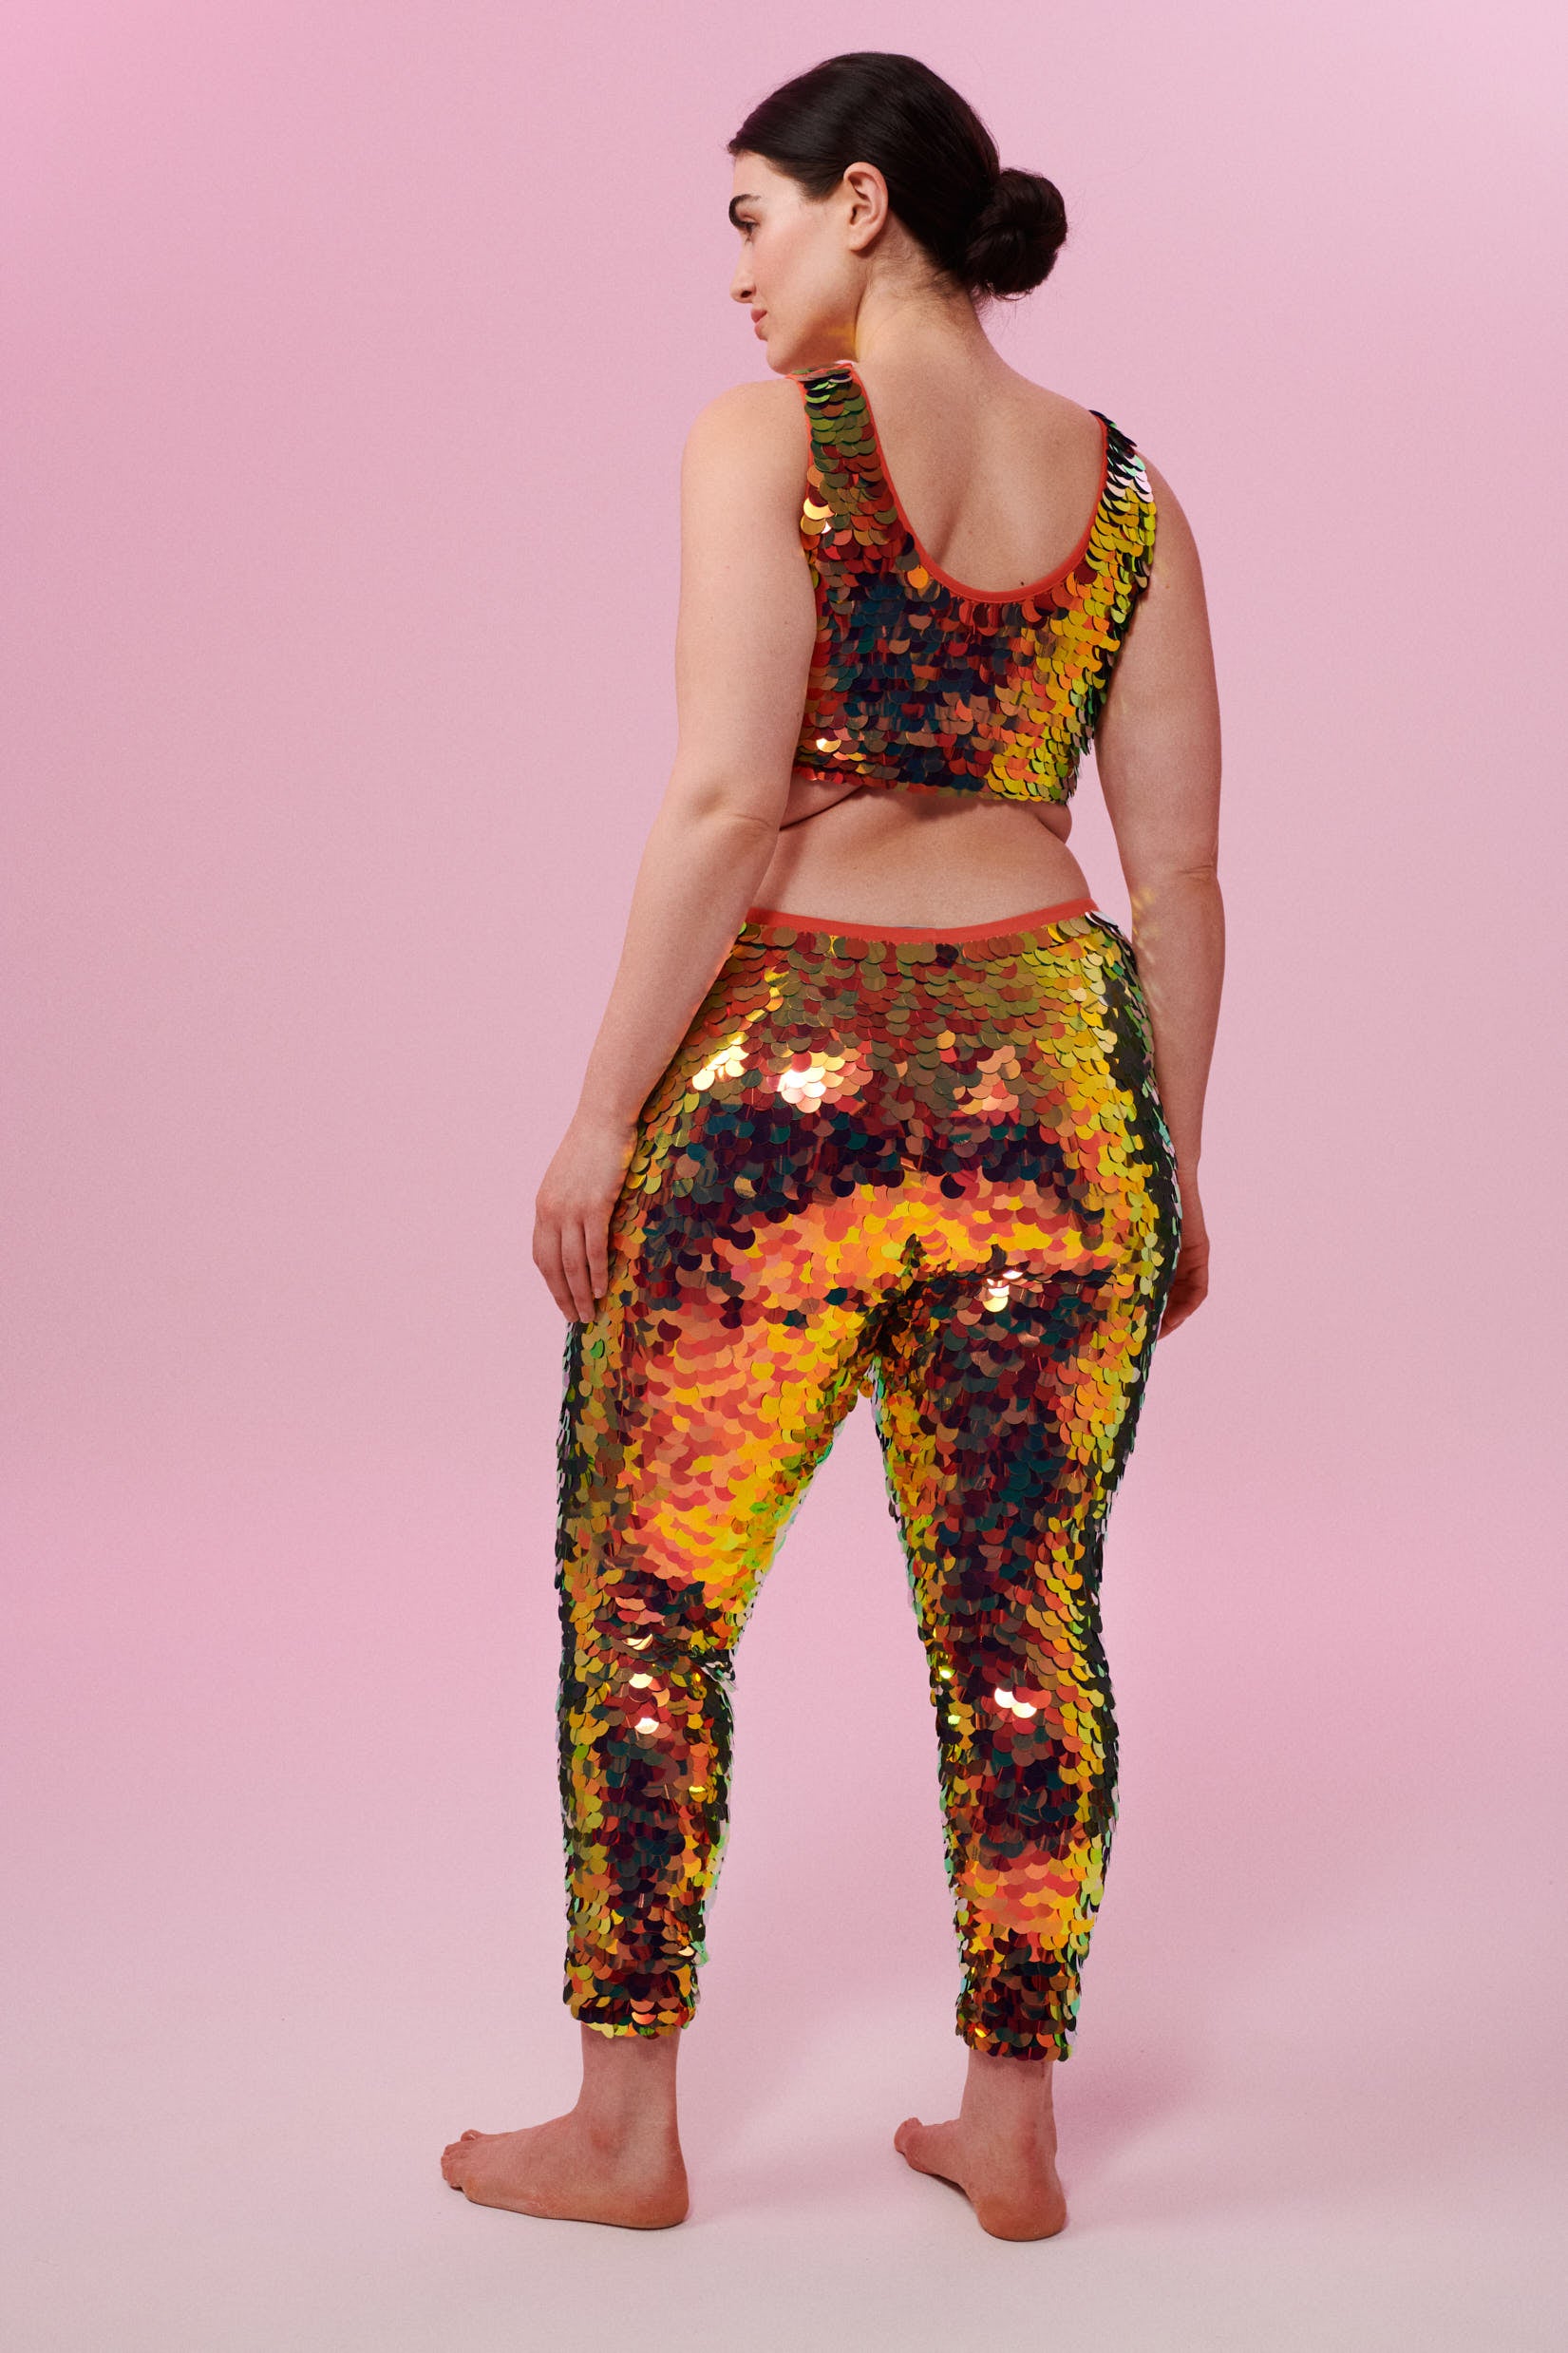 A rear view of a woman wearing iridescent yellow, red and orange stretchy Indus leggings covered in large round holographic Rosa Bloom sequins. The sequins glisten, creating a mix of shimmering colours make this sequin glow. The model is also wearing a matching stretchy sequin vest top, in matching colours. This Ember sequin outfit looks like it is glowing. 